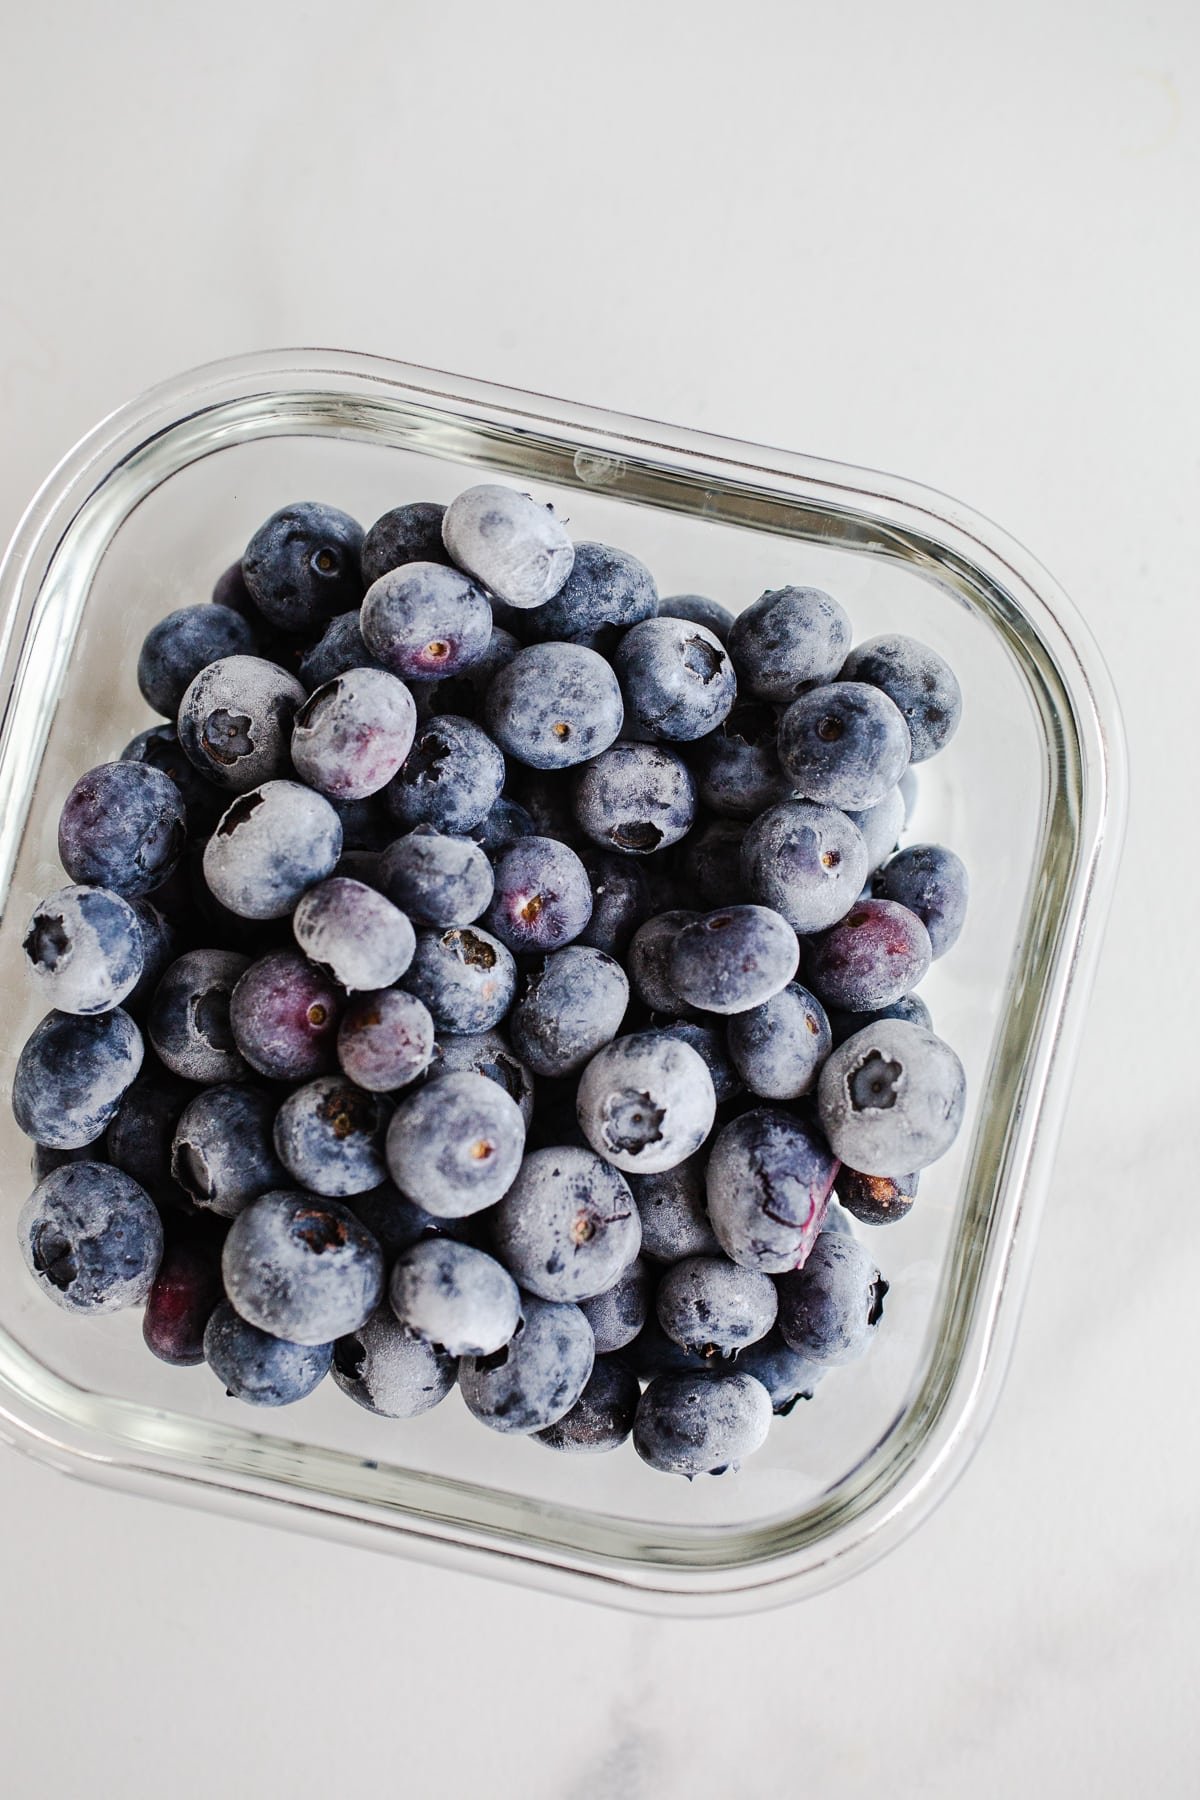 Frozen blueberries in a glass container.